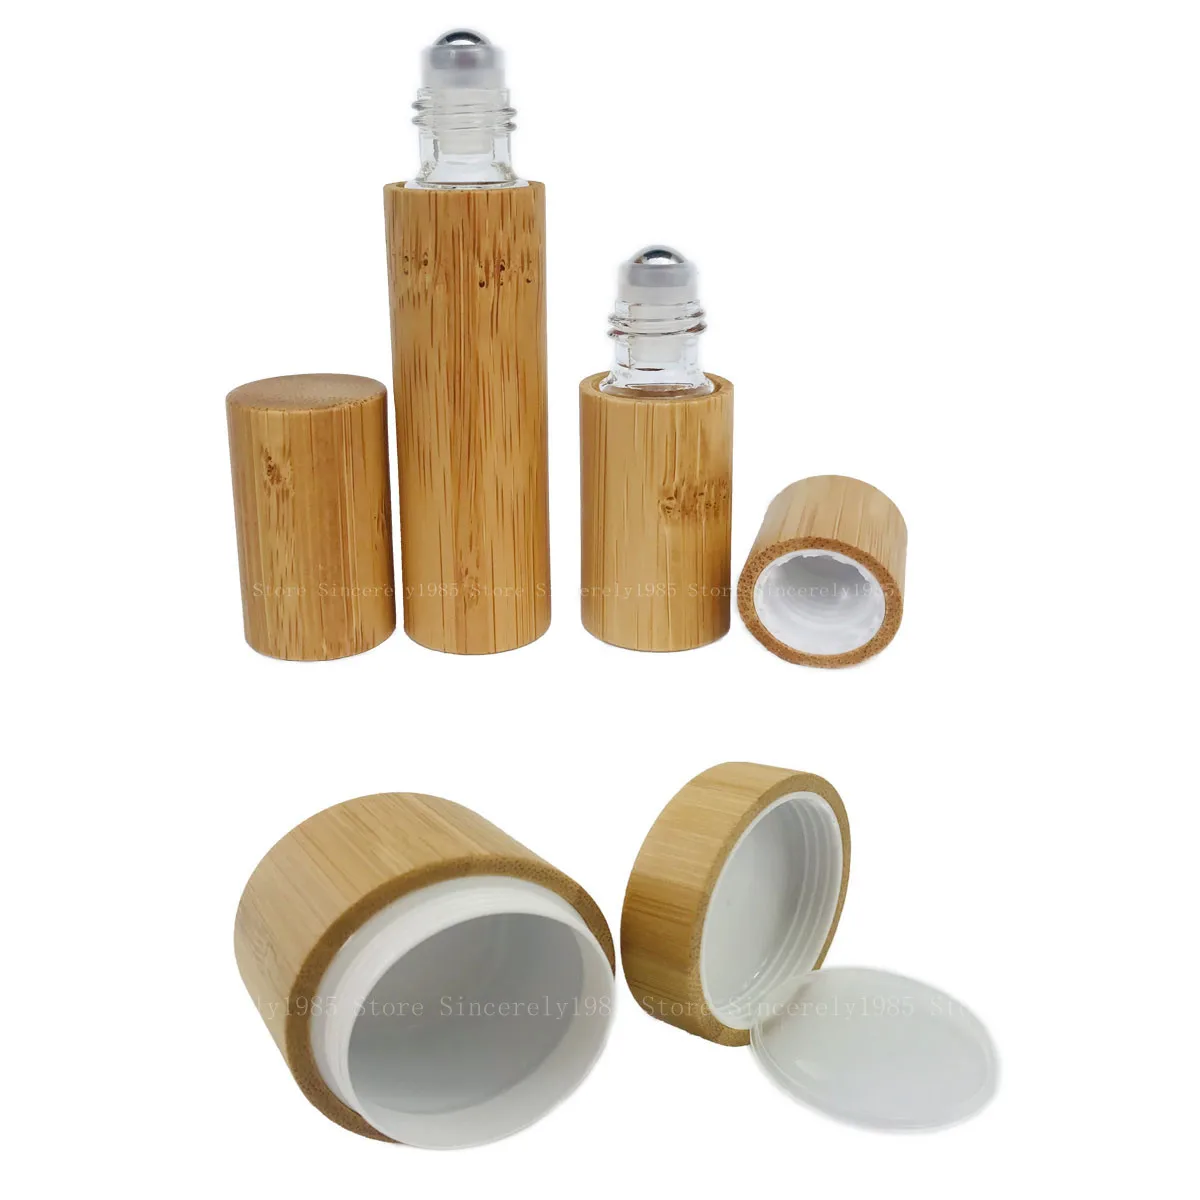 5ML 10ML Bamboo Wood Bottle Perfume Stainless Steel Roller Ball Aroma Diffuser Bottle, 30ml Face Cream Cosmetic Container Bottle